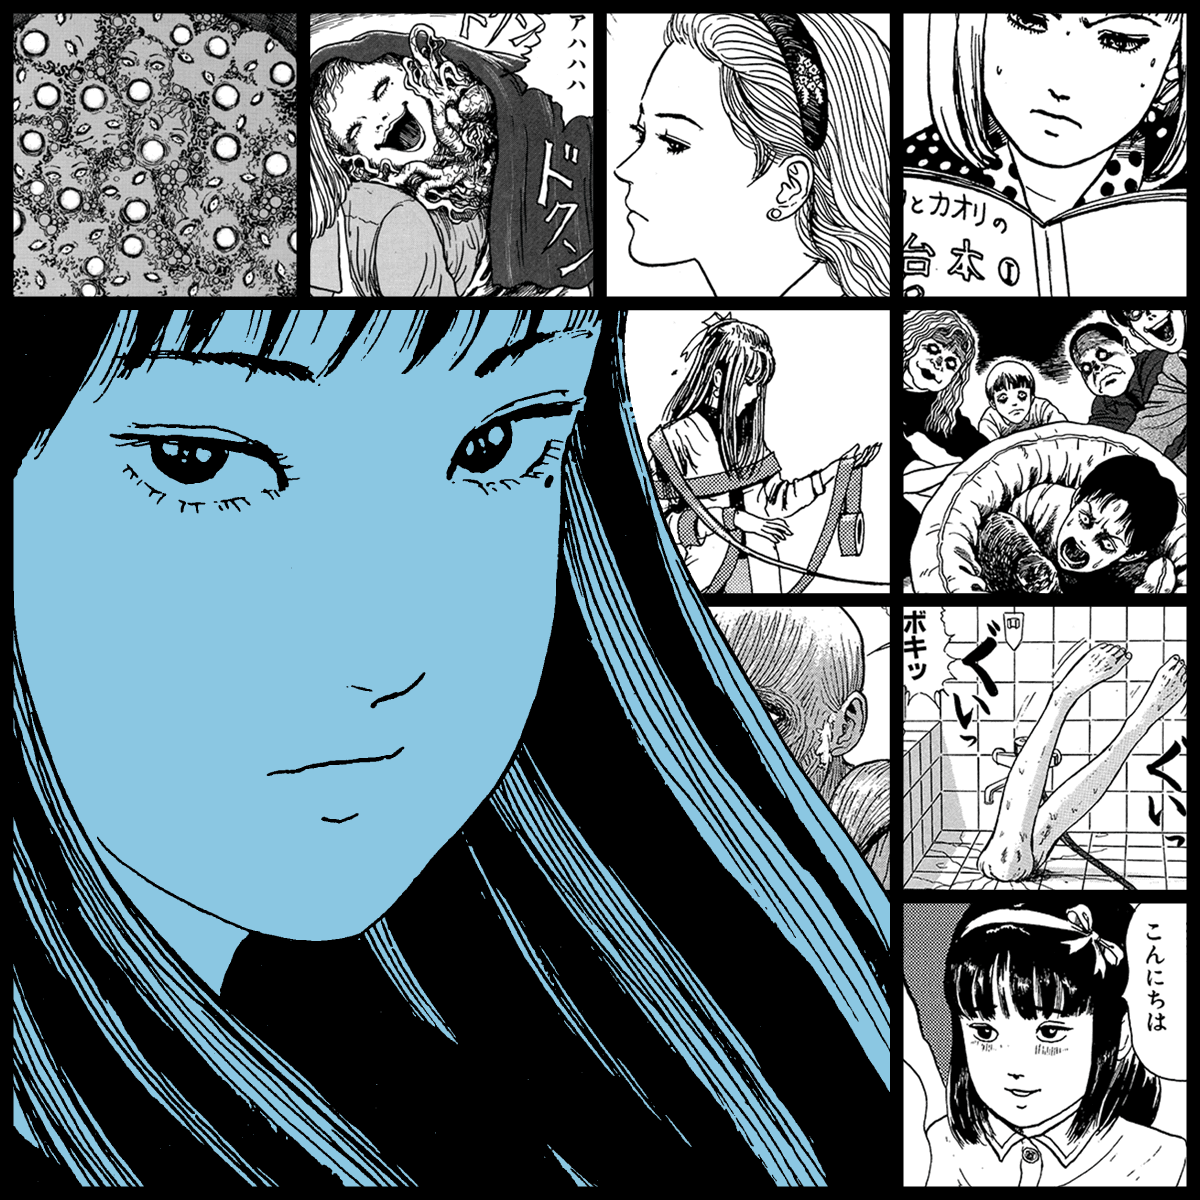 TOMIE by Junji Ito #1527